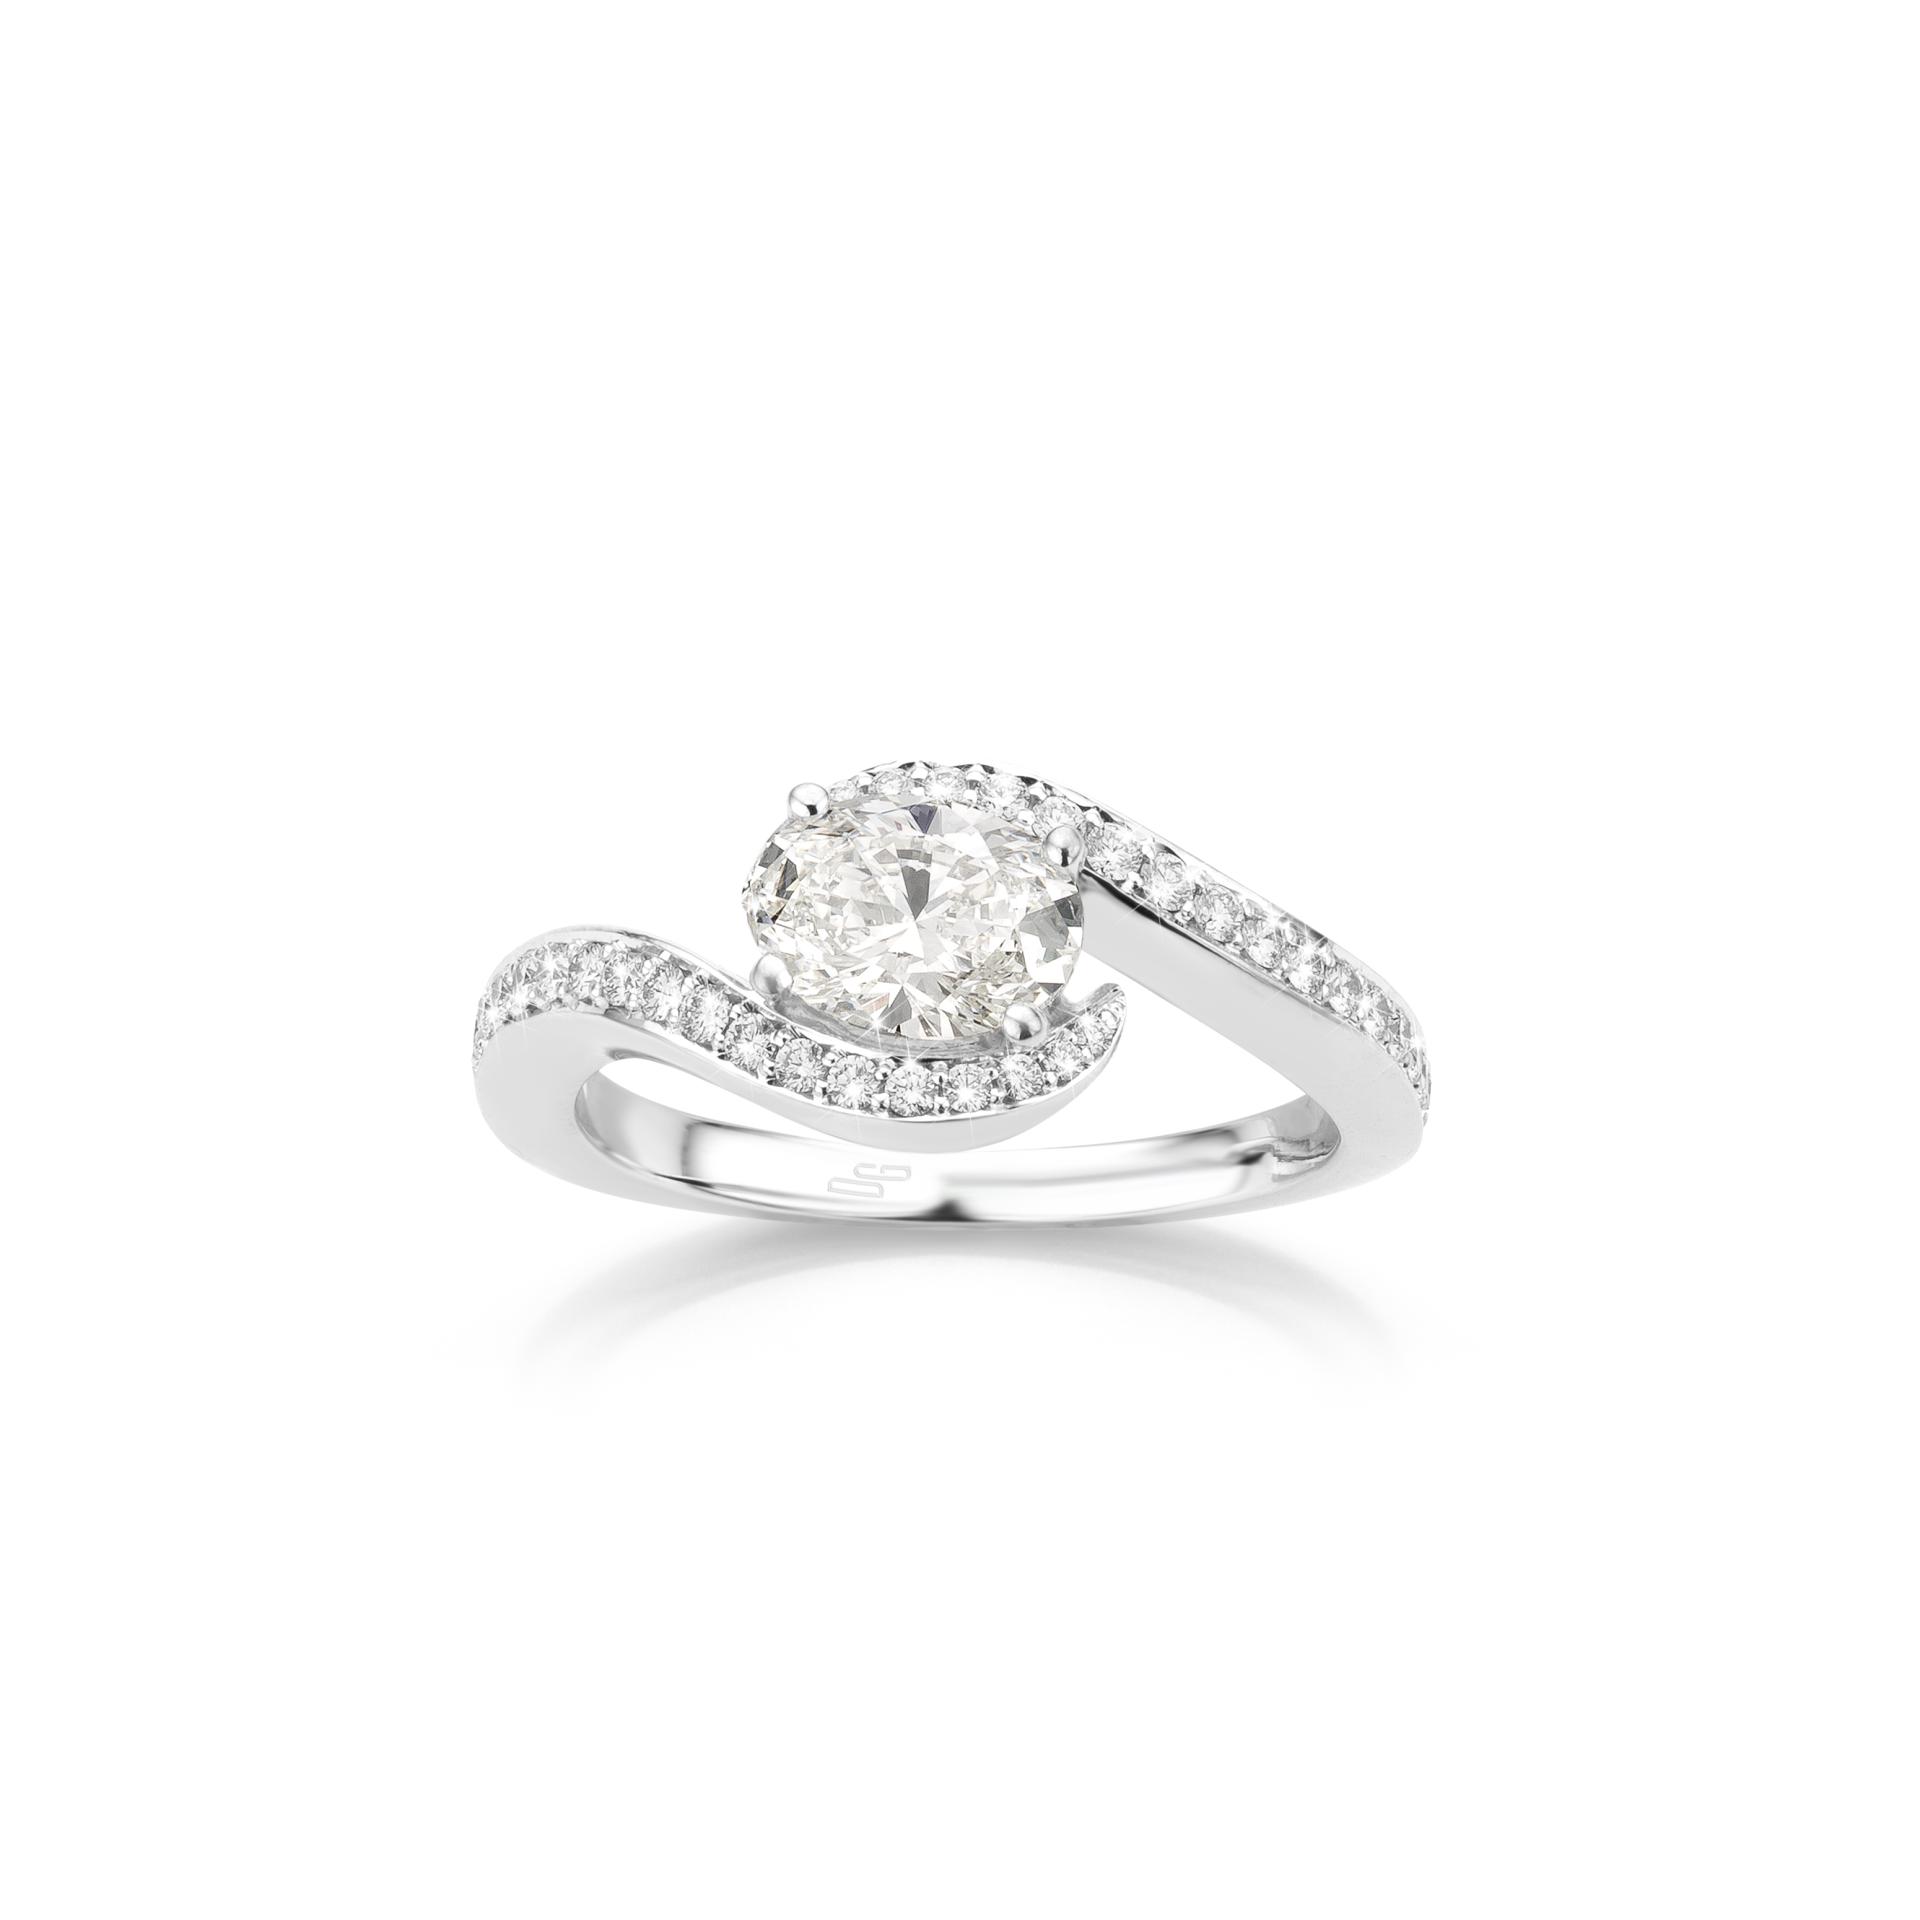 White gold ring set with oval shaped diamond and brilliant cut diamonds made by Maison De Greef